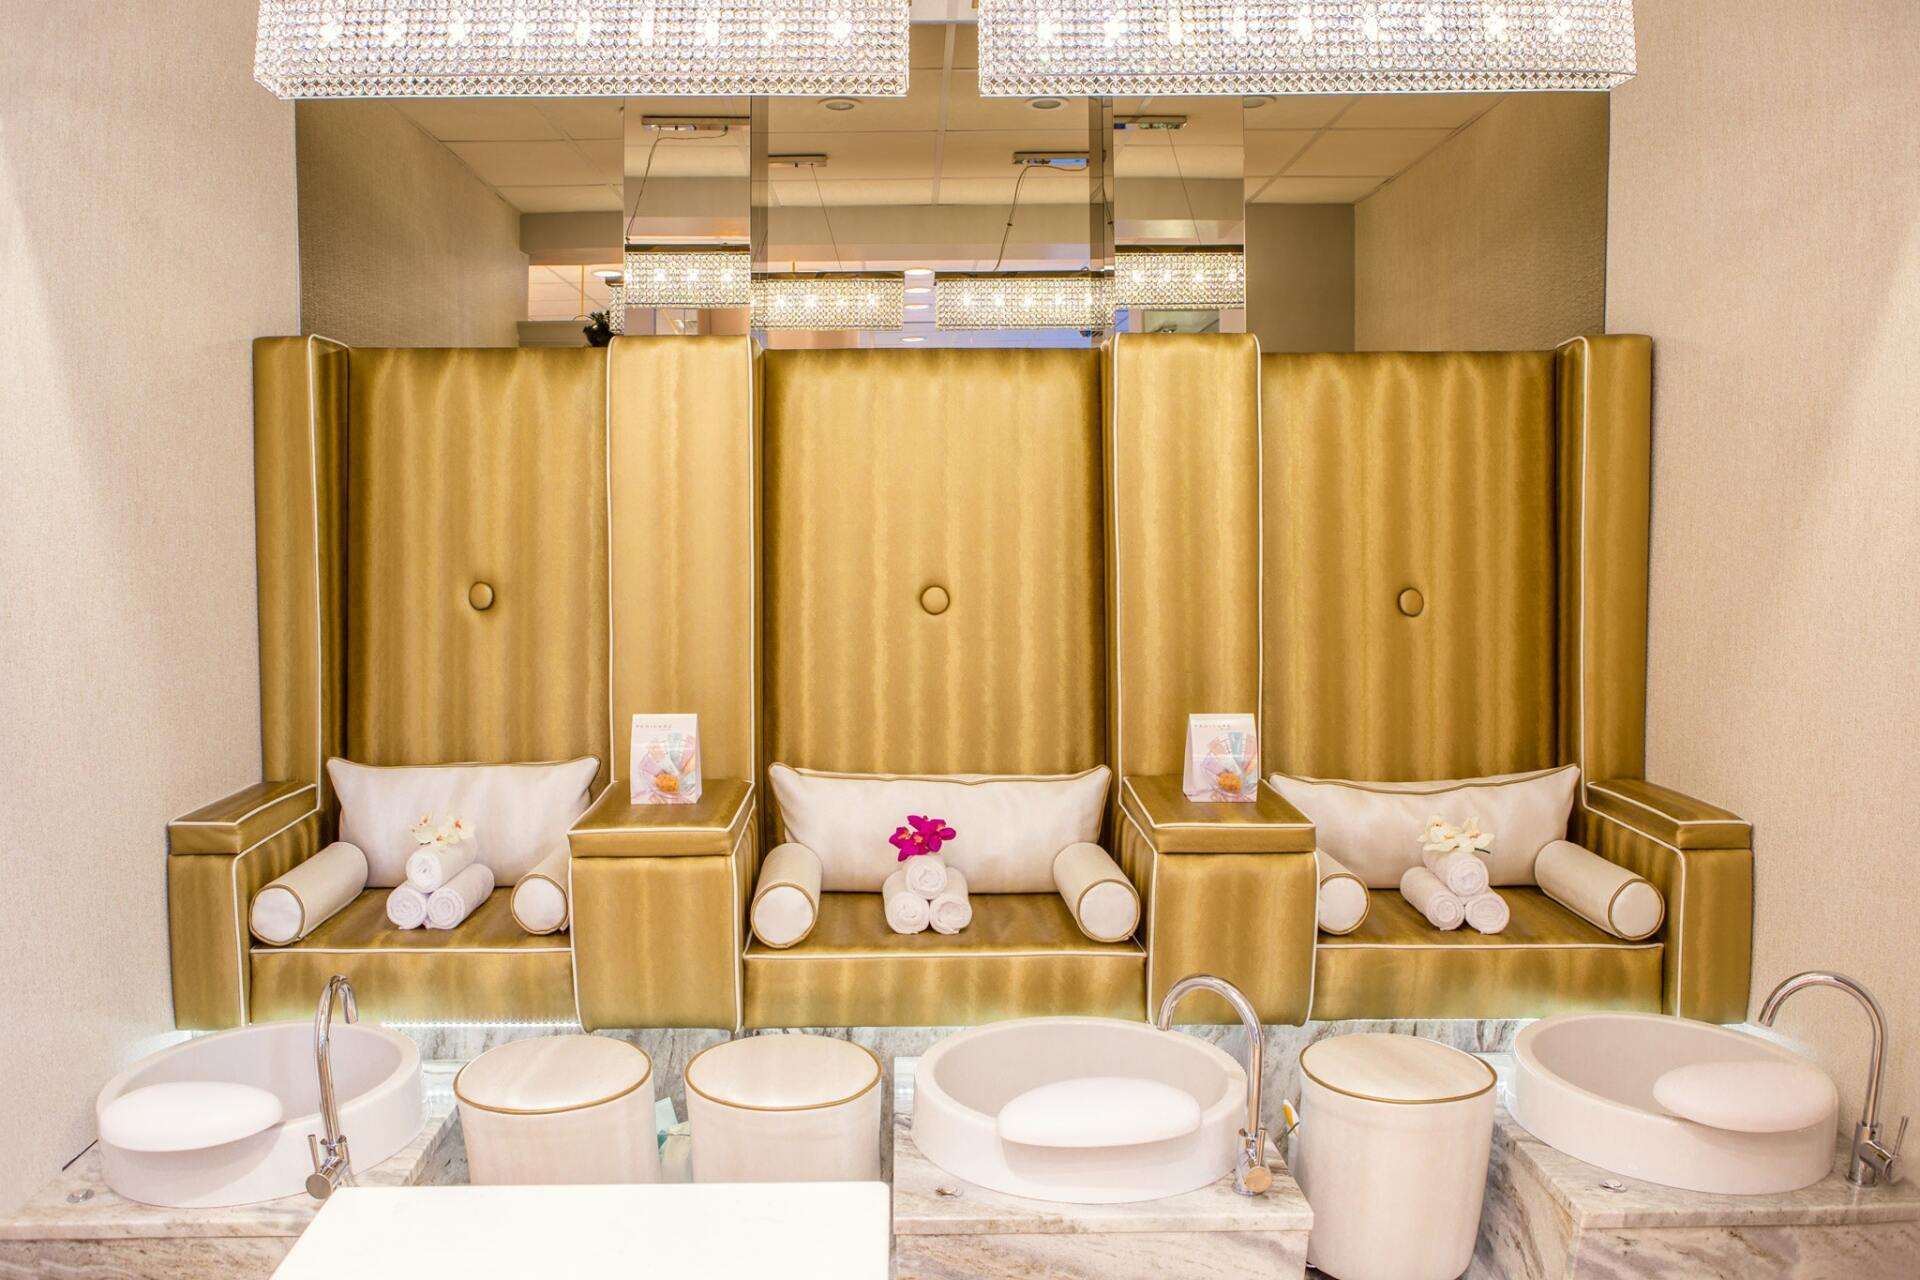 spa with gold chairs and foot baths for pedicures